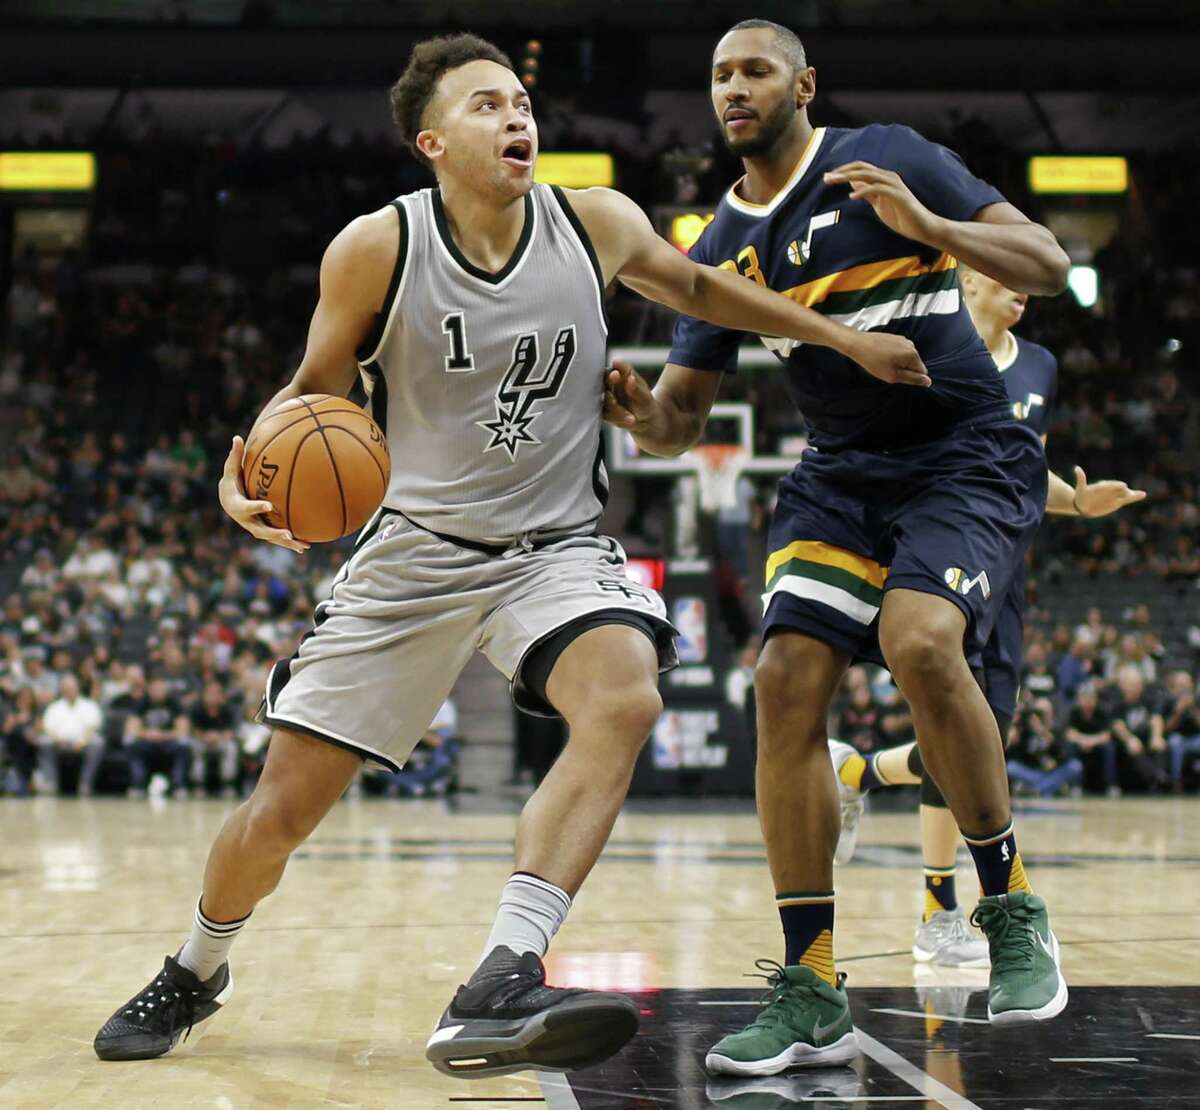 Spurs’ Kyle Anderson looks for room around the Utah Jazz’s Boris Diaw during second half action on April 2, 2017 at the AT&T Center.